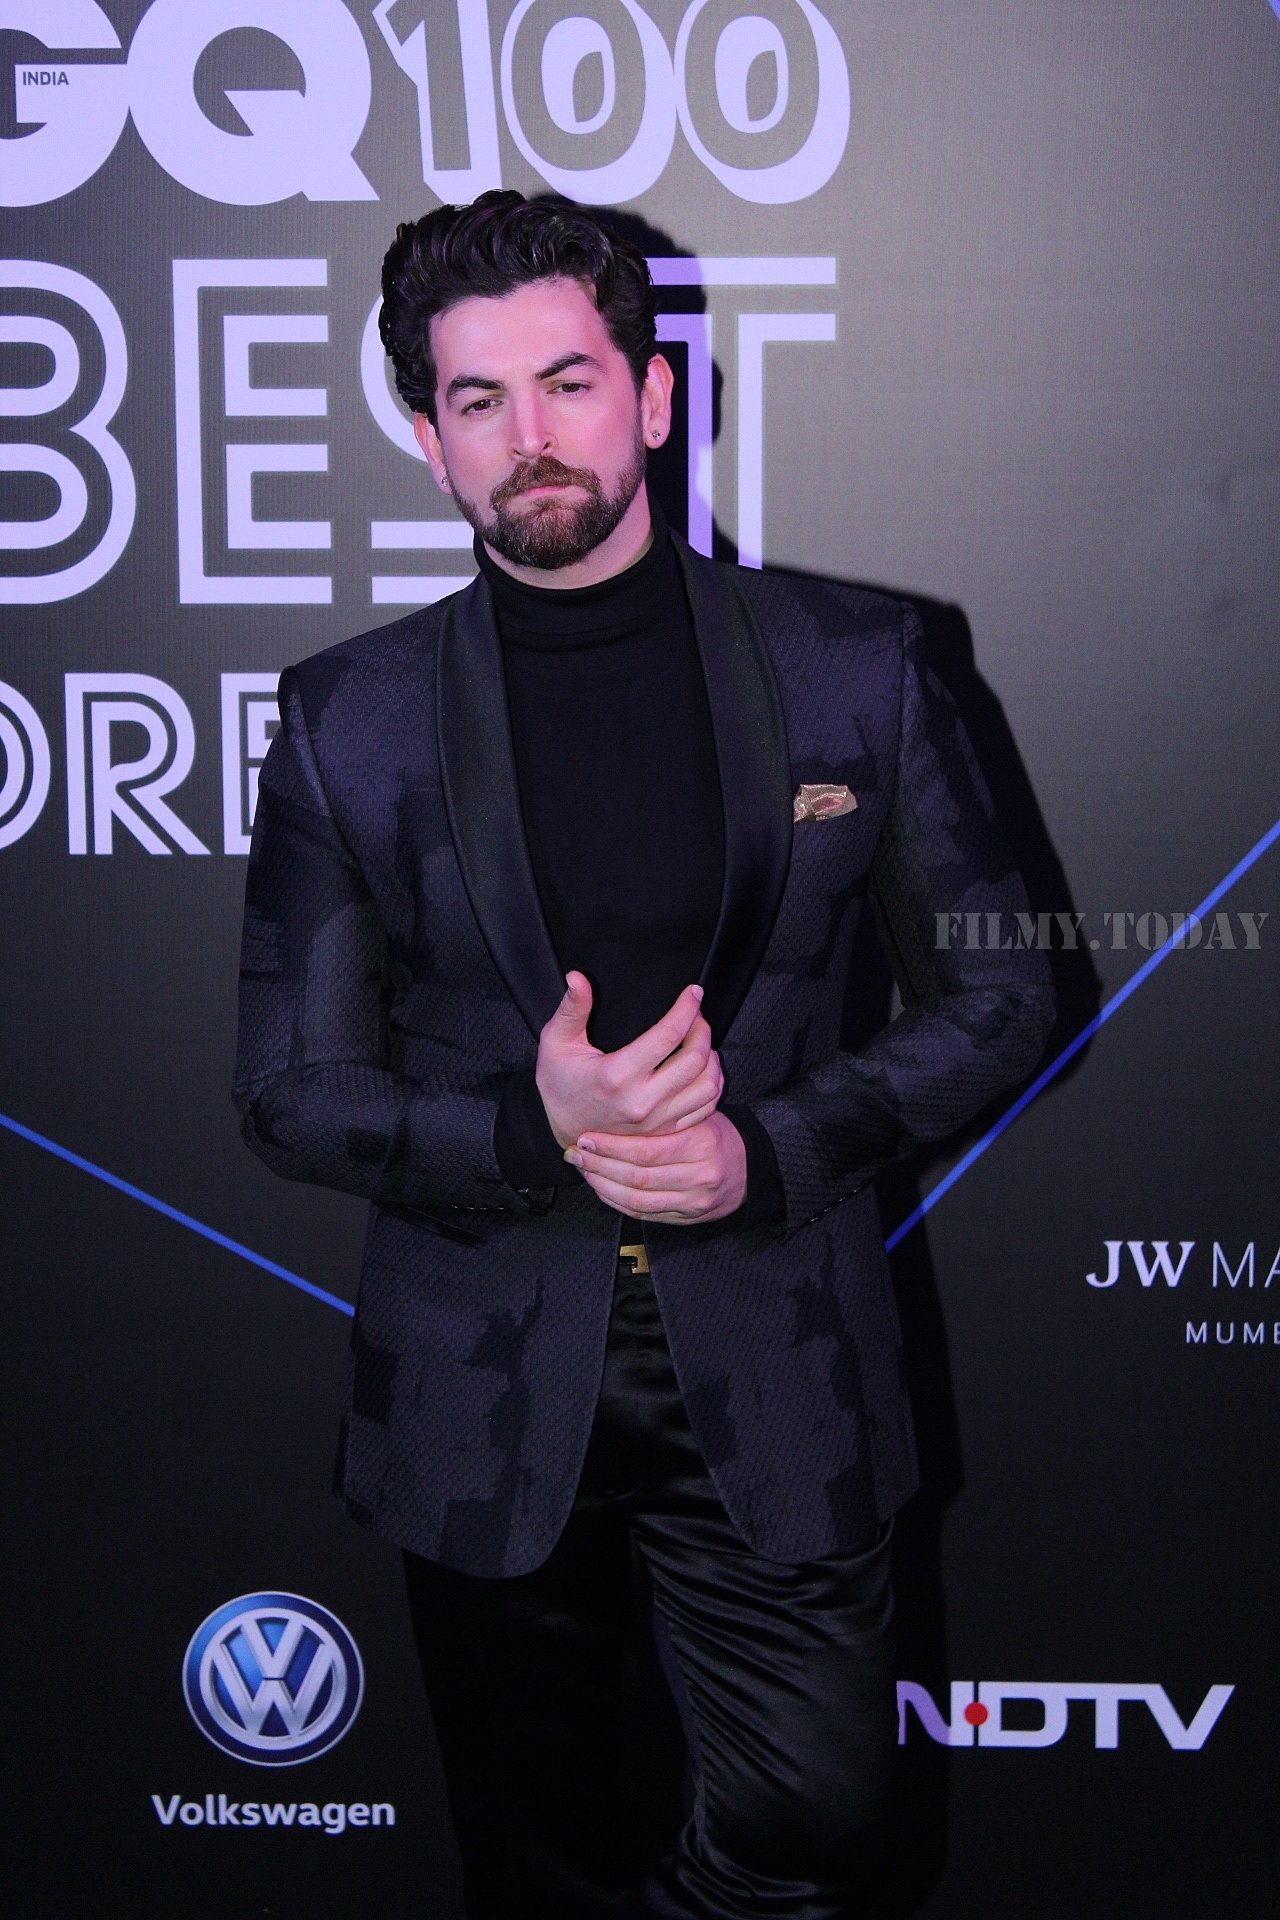 Neil Nitin Mukesh - Photos: Star Studded Red Carpet Of Gq 100 Best Dressed 2019 | Picture 1651181